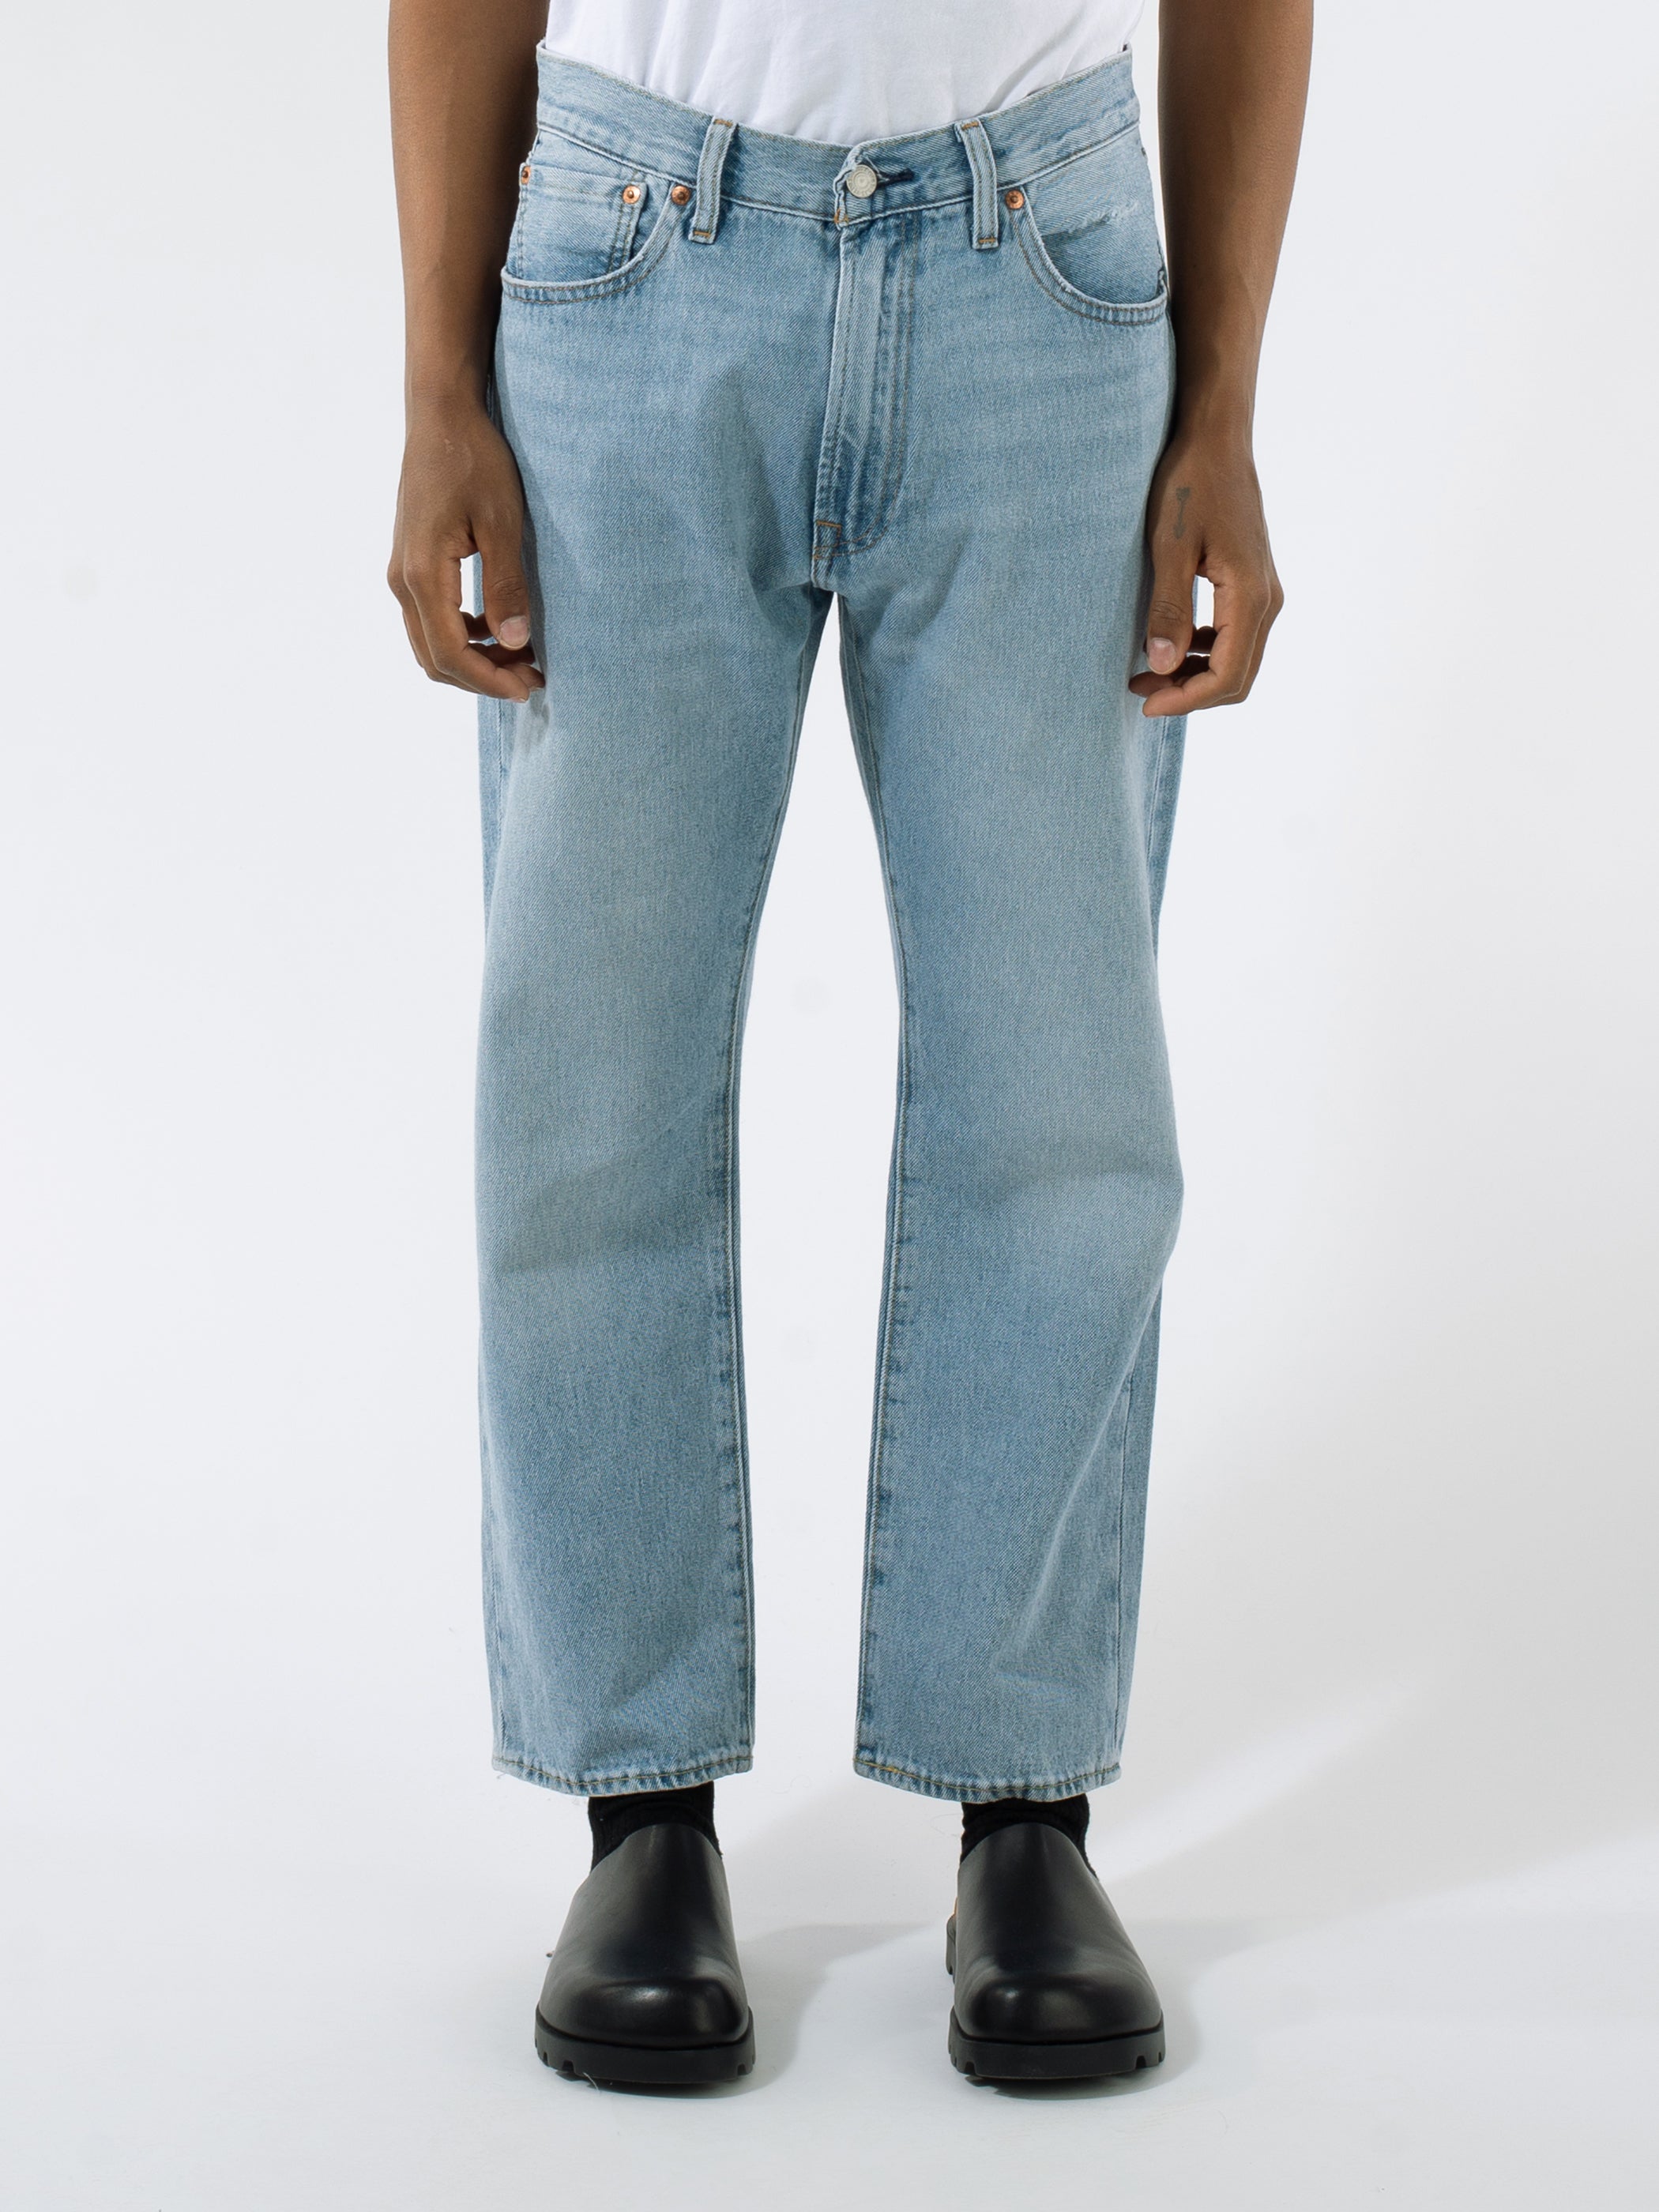 Levi's - 551 Z Authentic Straight Crop Jeans in Dream Stone